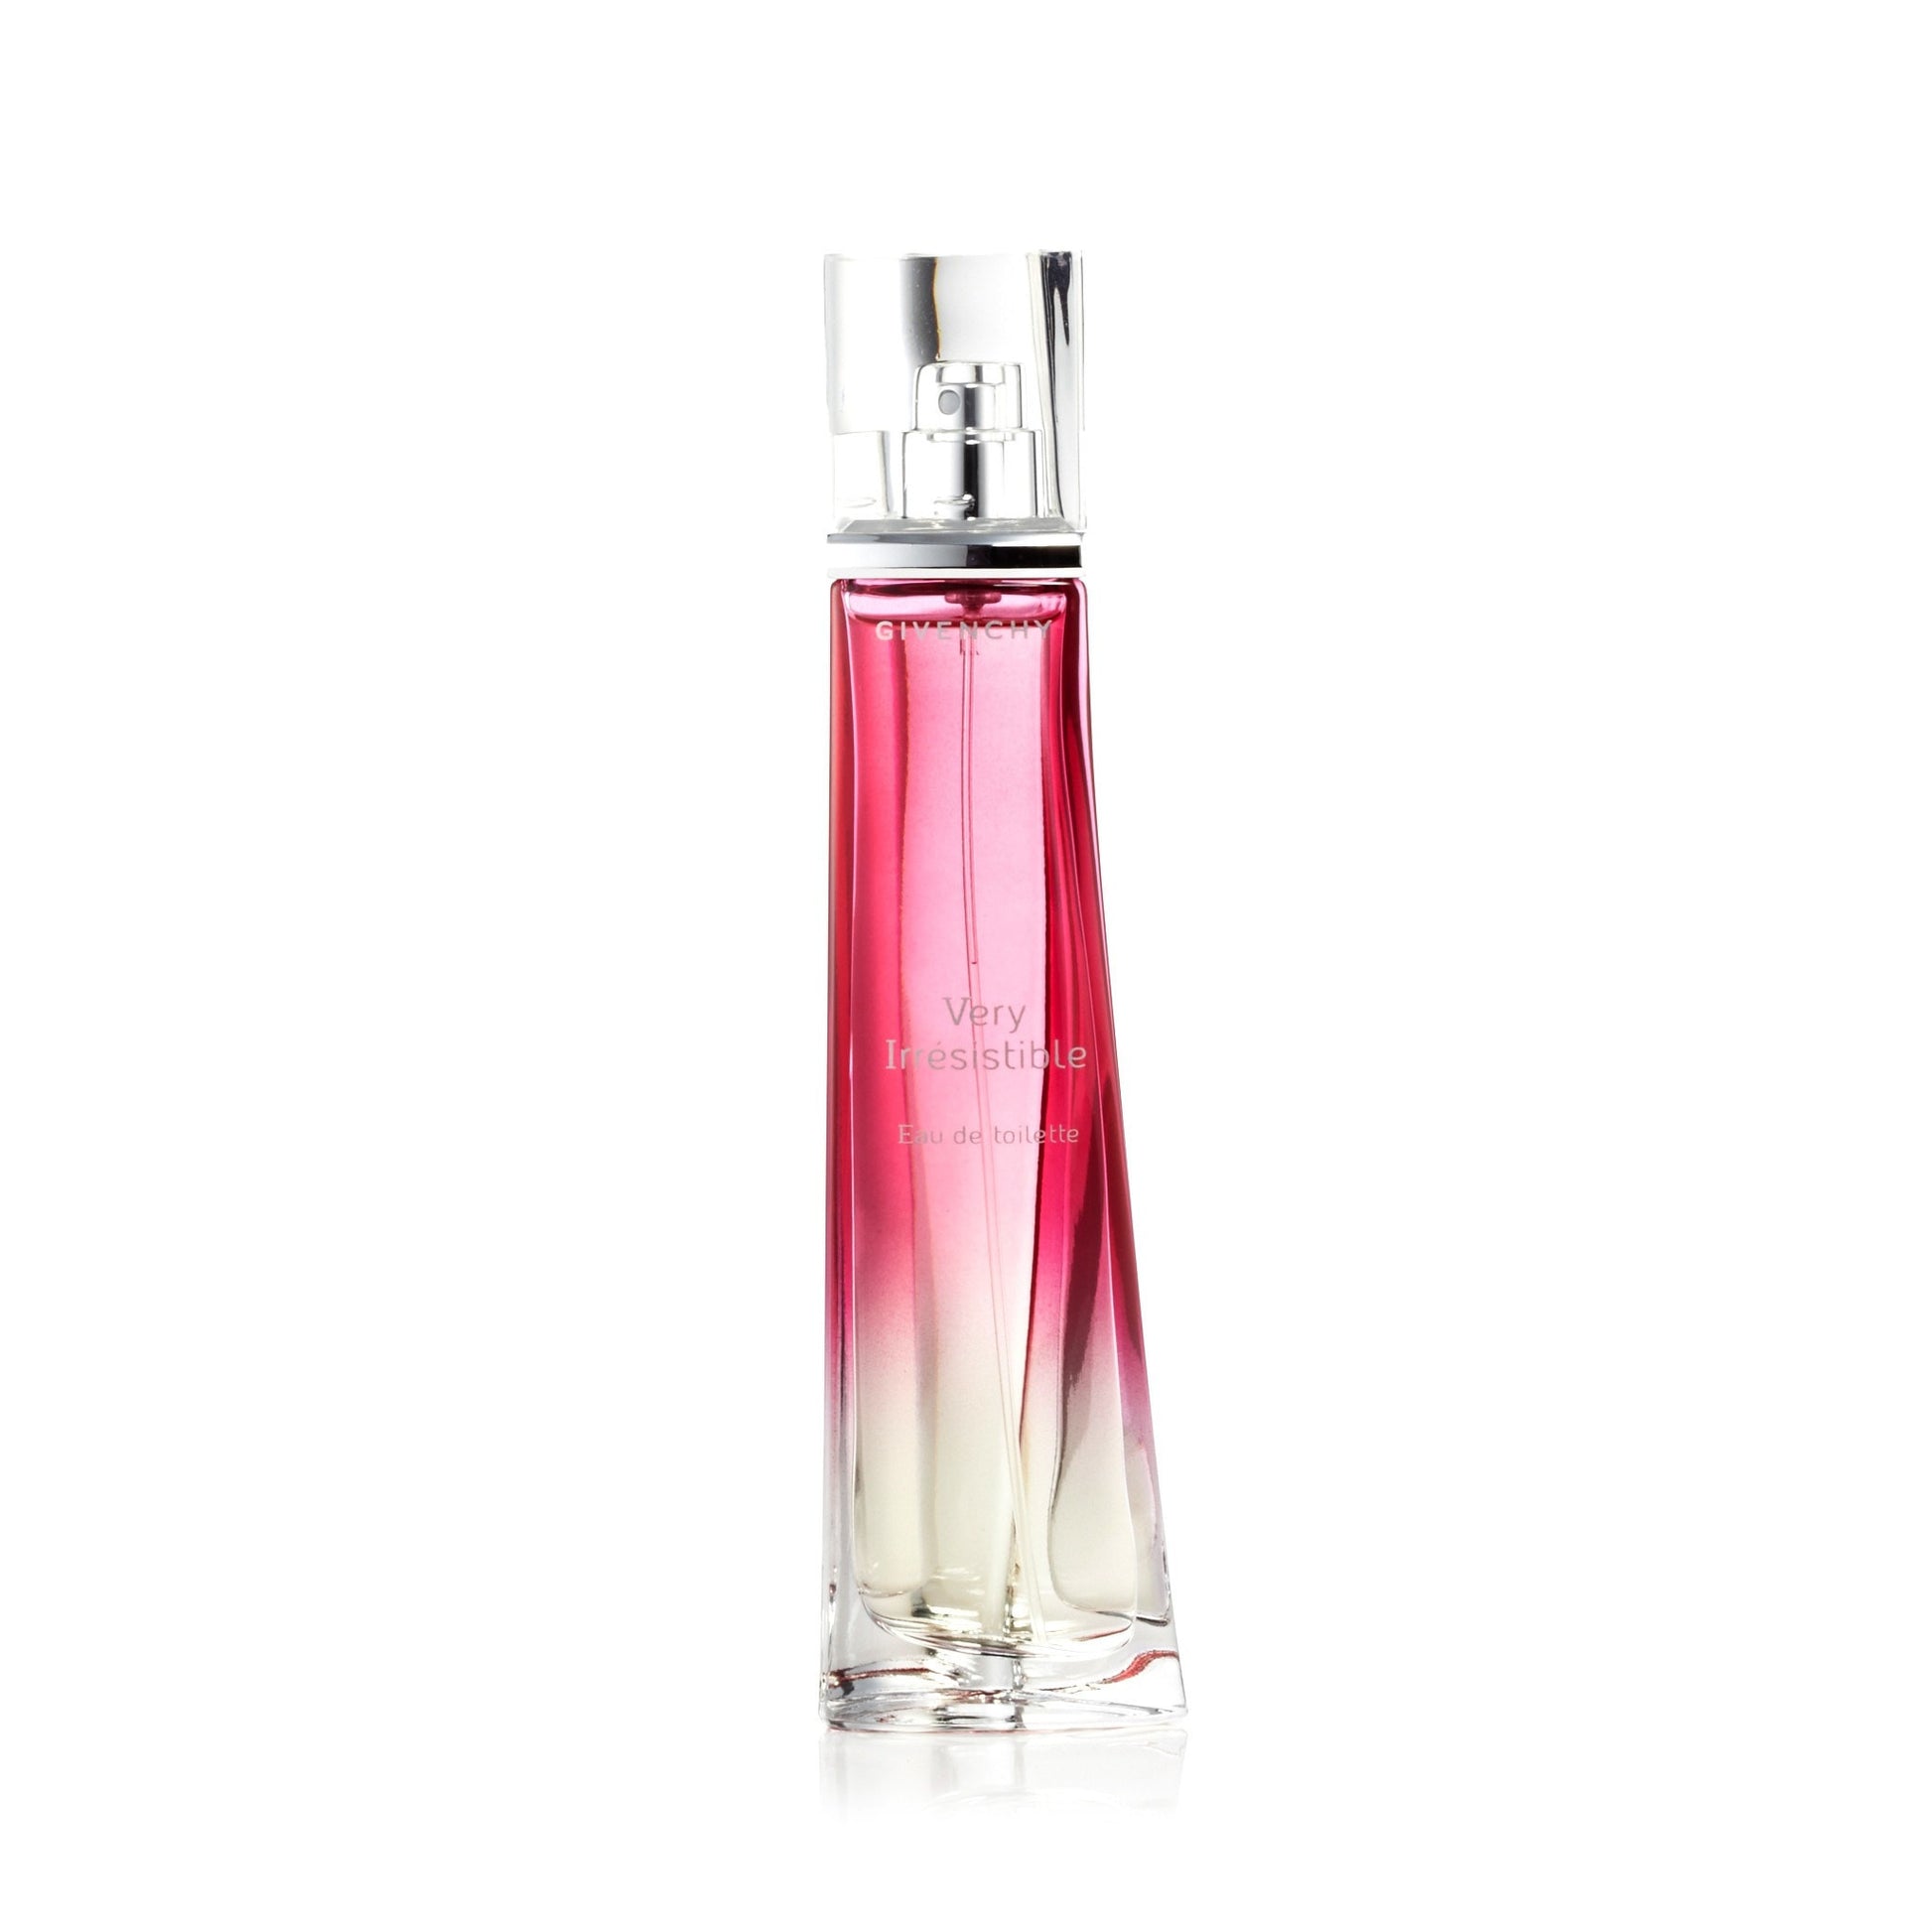 Very Irresistible Eau de Toilette Spray for Women by Givenchy 2.5 oz. Click to open in modal